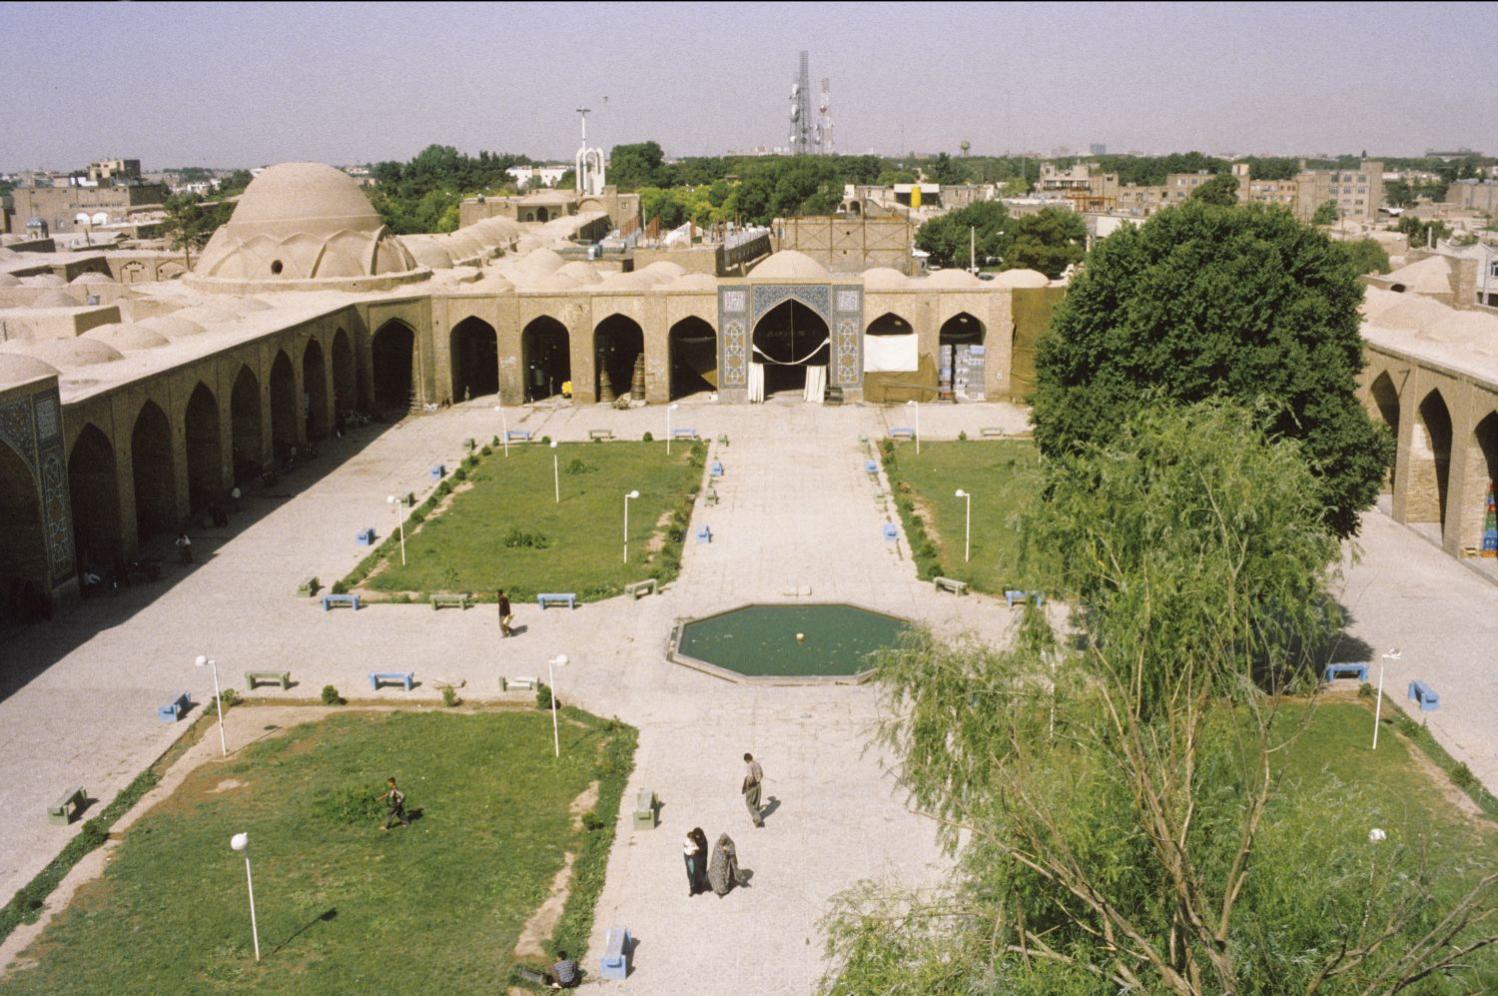 View of the inner courtyard